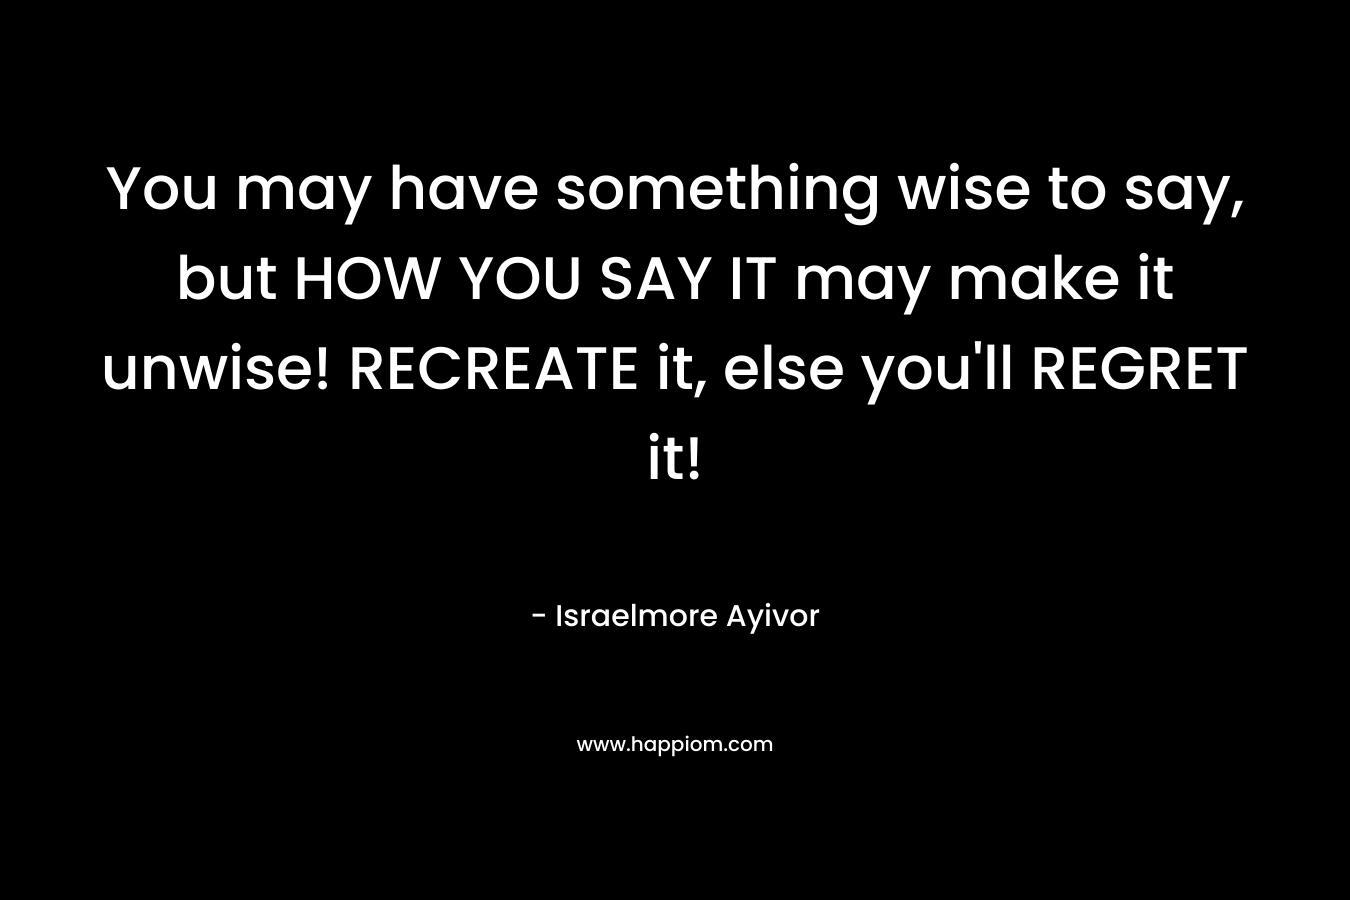 You may have something wise to say, but HOW YOU SAY IT may make it unwise! RECREATE it, else you'll REGRET it!